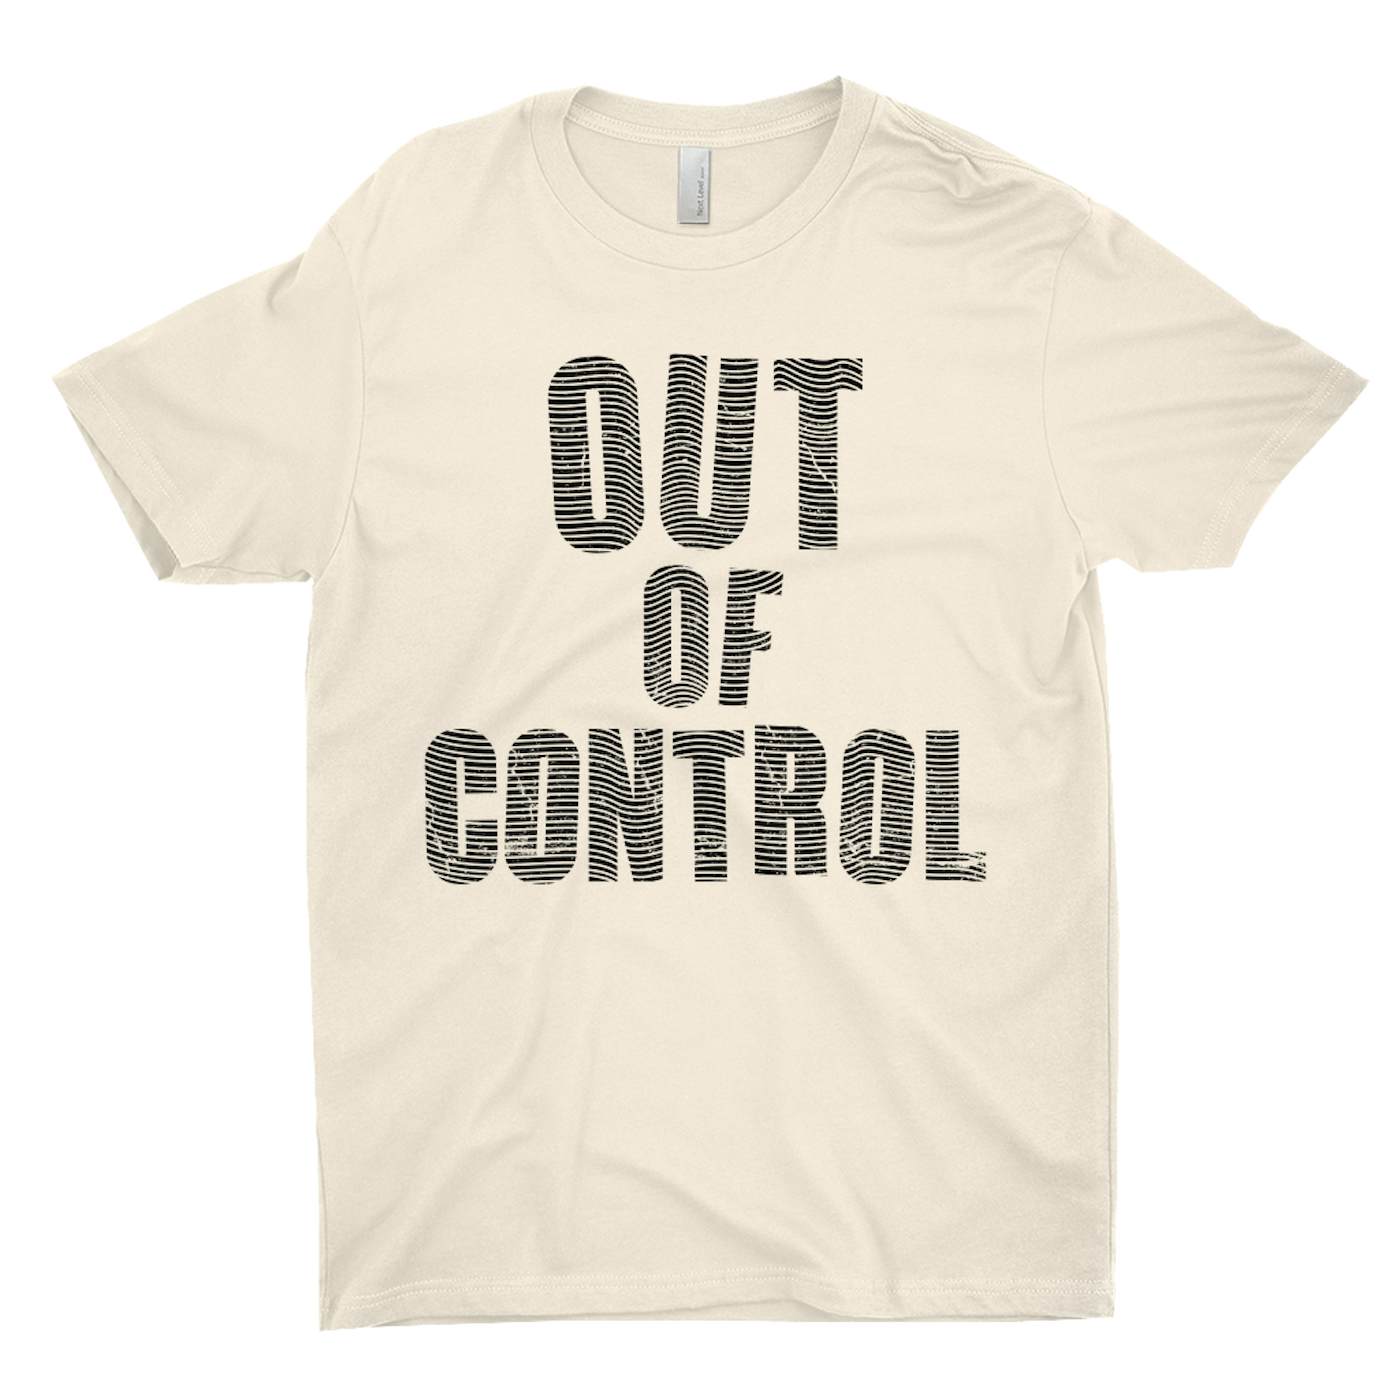 The Clash T-Shirt | Out Of Control Worn By Joe Stummer The Clash Shirt